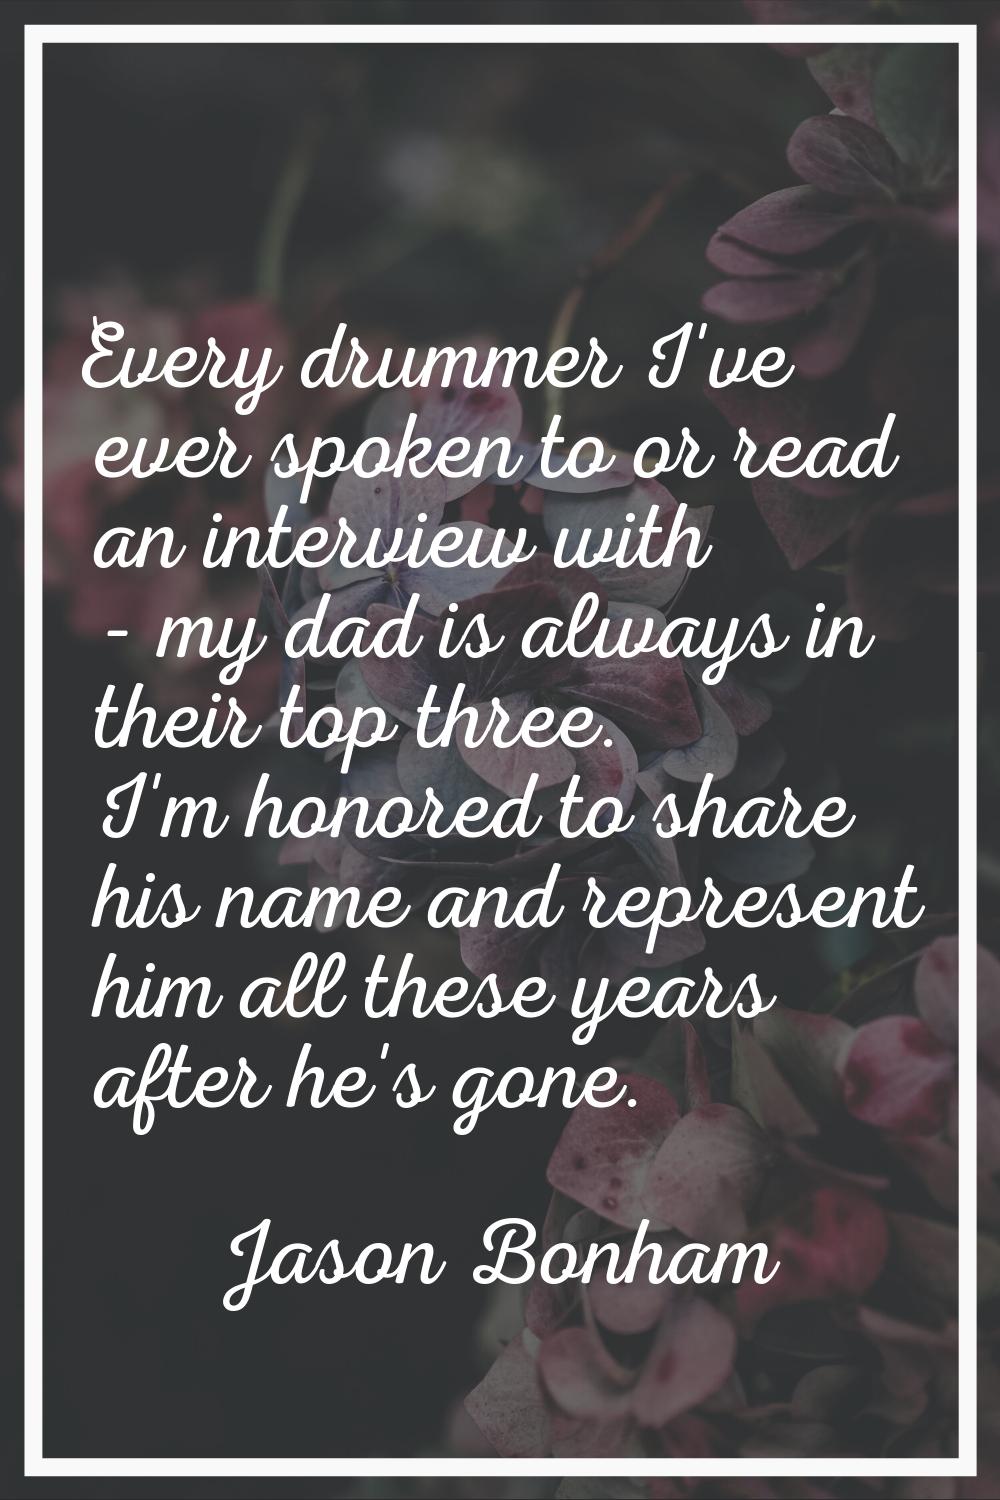 Every drummer I've ever spoken to or read an interview with - my dad is always in their top three. 